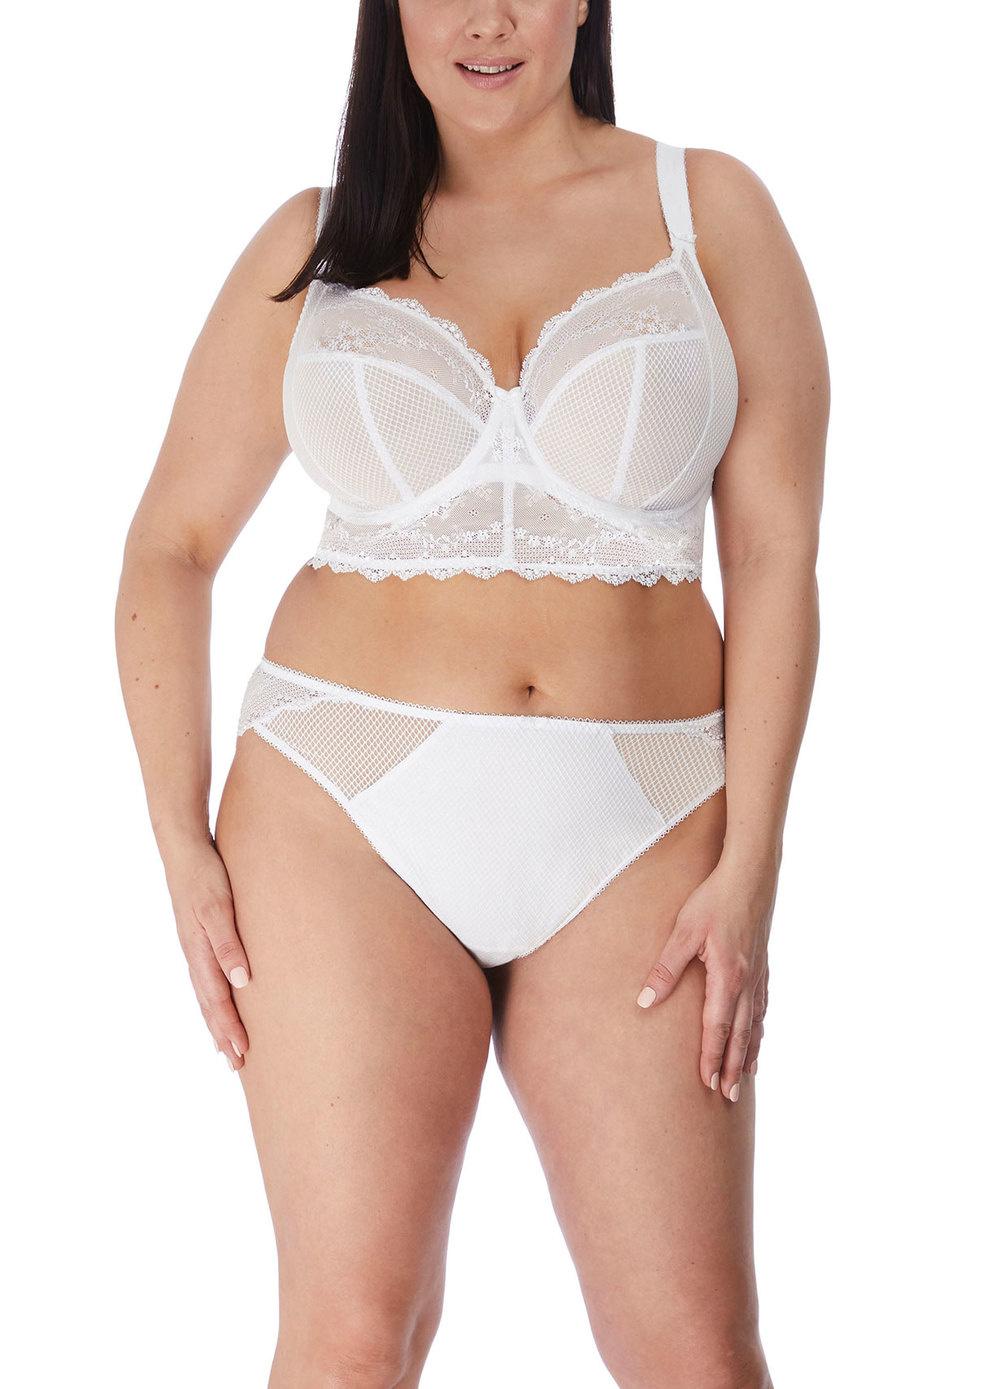 rolle forvirring godt Plus Size Bridal Lingerie: 28 Stunning Sets & How to Choose Them -  hitched.co.uk